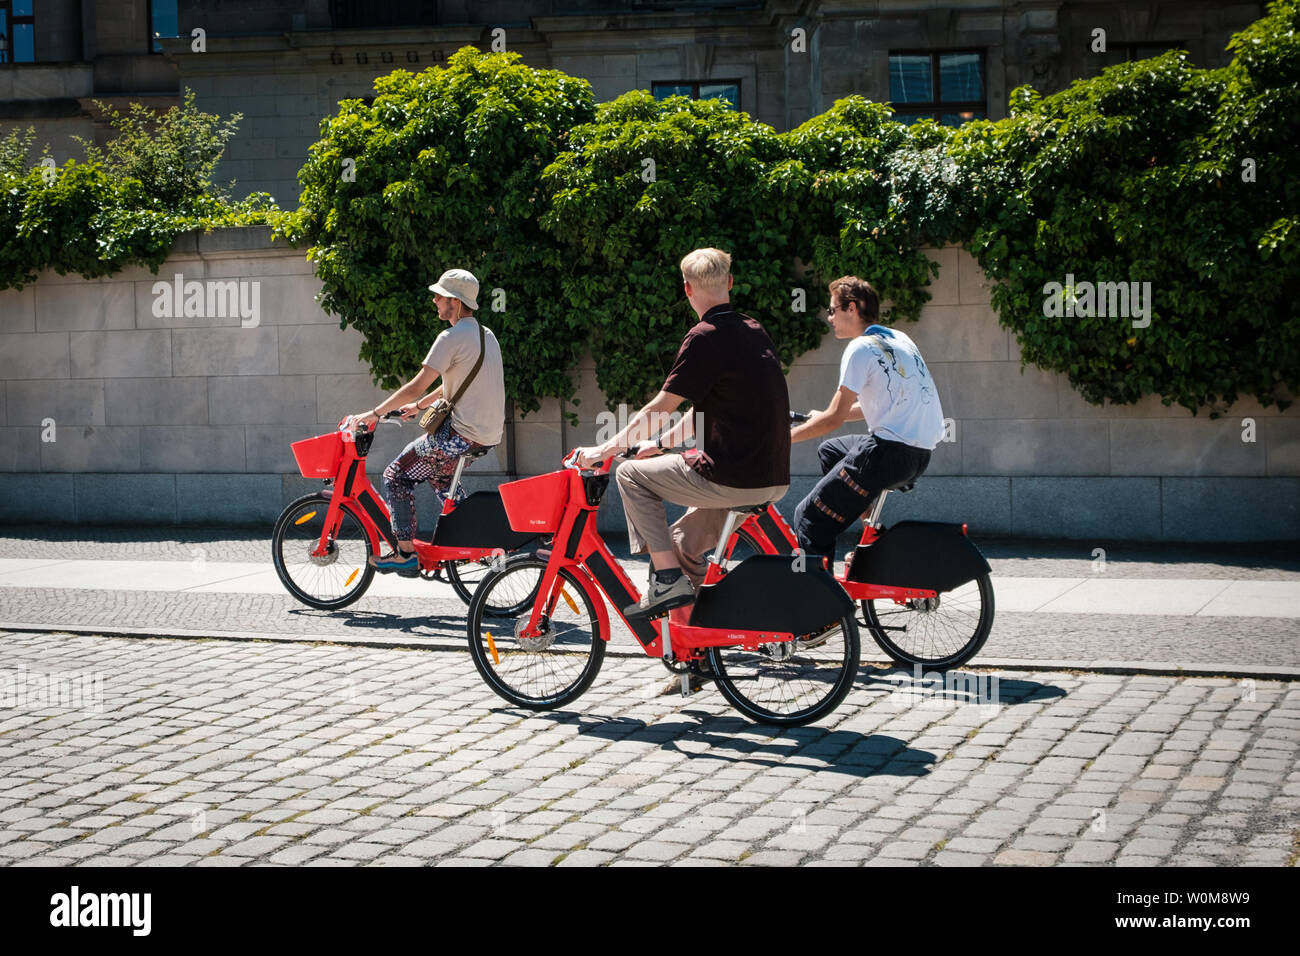 Berlin, Germany - June, 2019: Three young men riding ebikes or. electric bikes of   bicycle sharing service  JUMP by UBER  in Berlin Stock Photo